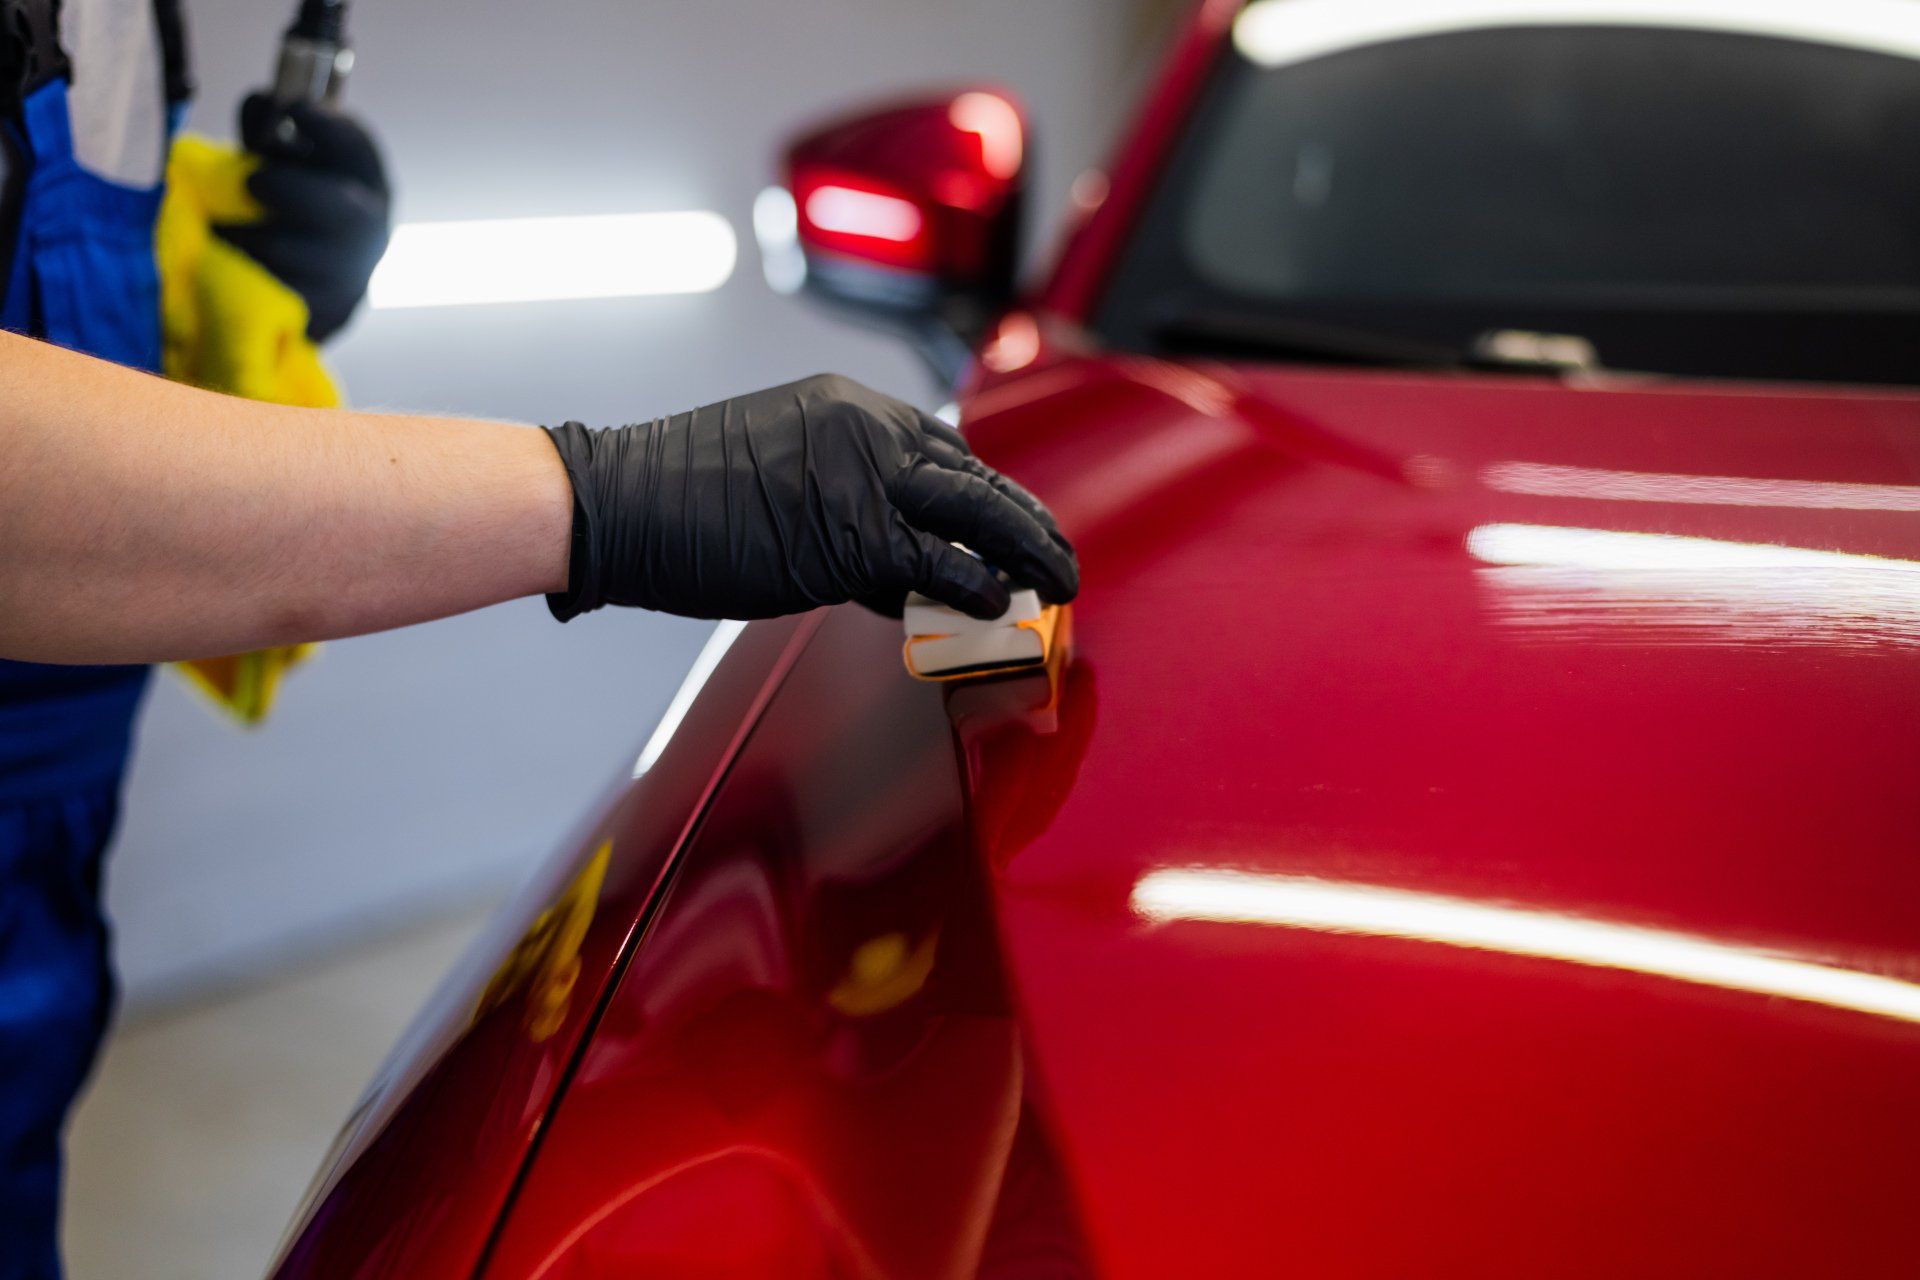 How to fix and prevent clear coat peeling on your car